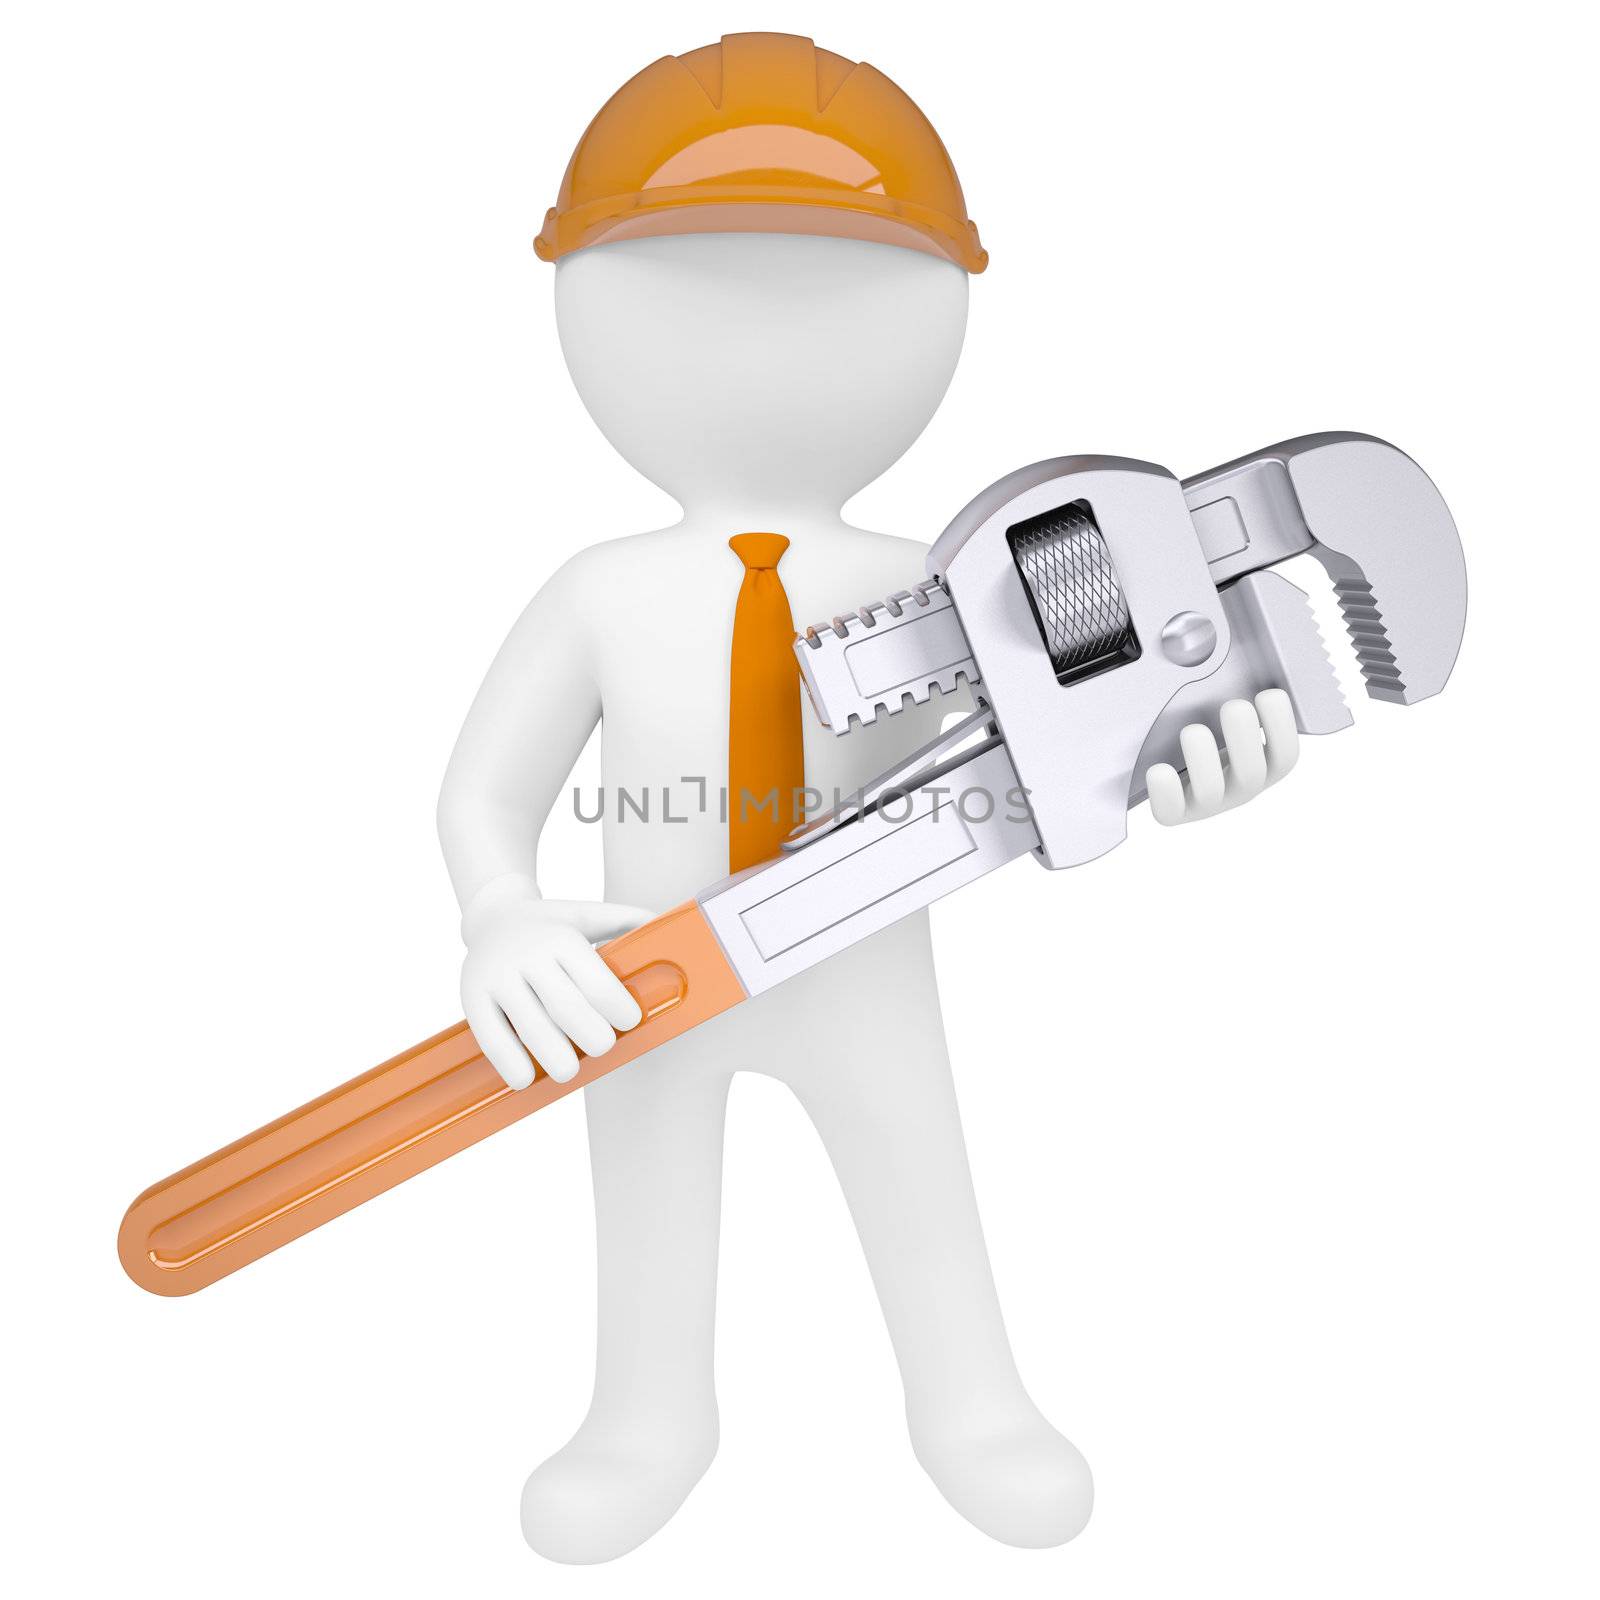 3D man holding a pipe wrench. Isolated render on a white background